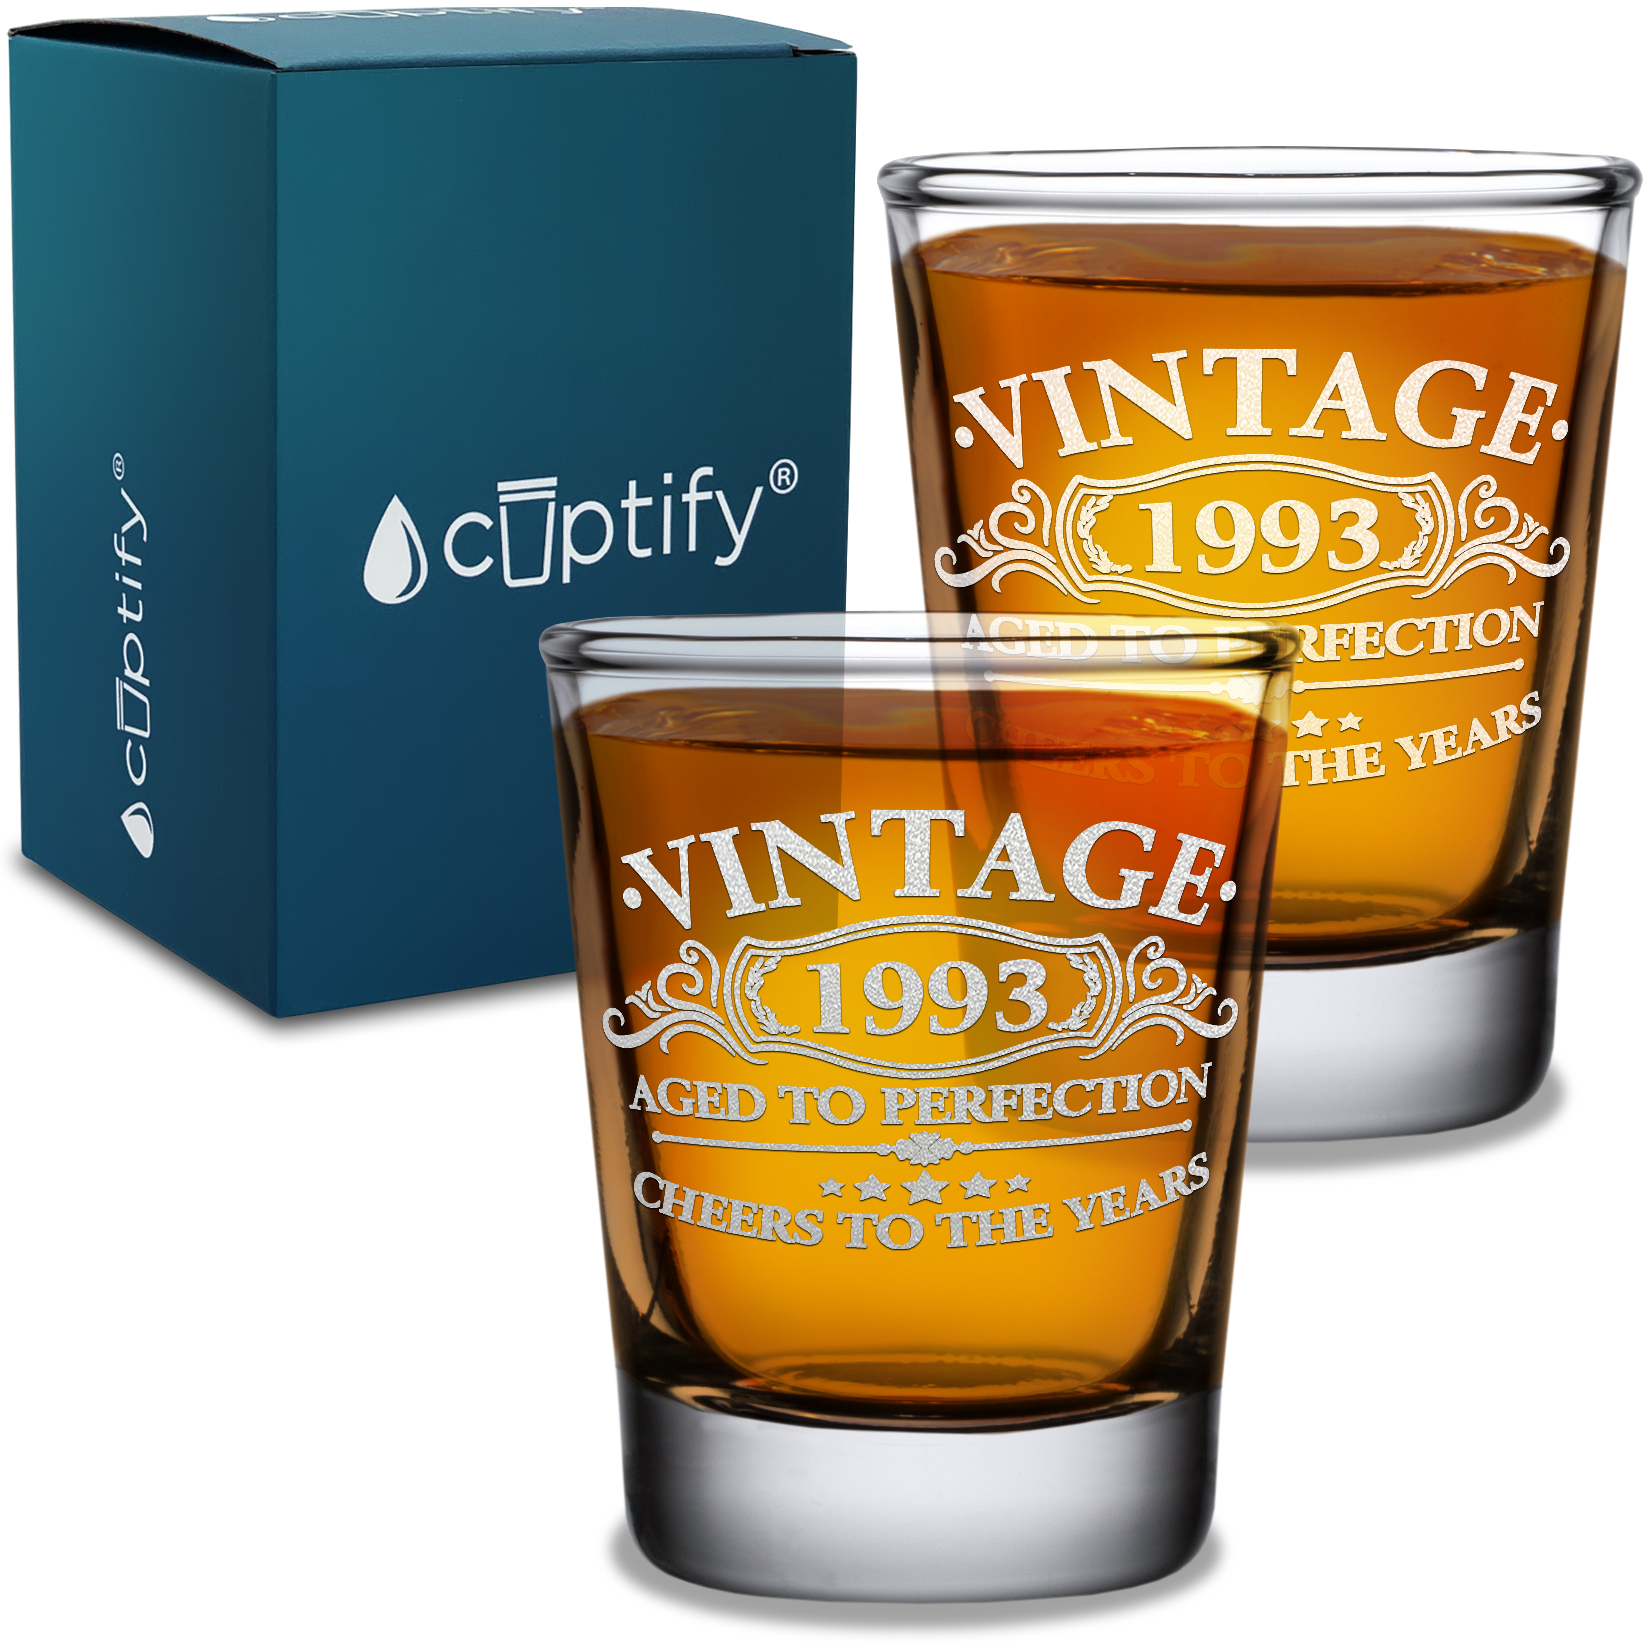 Vintage Aged To Perfection Cheers To 28 Years 1993 Laser Engraved on 2oz Shot Glasses - Set of 2